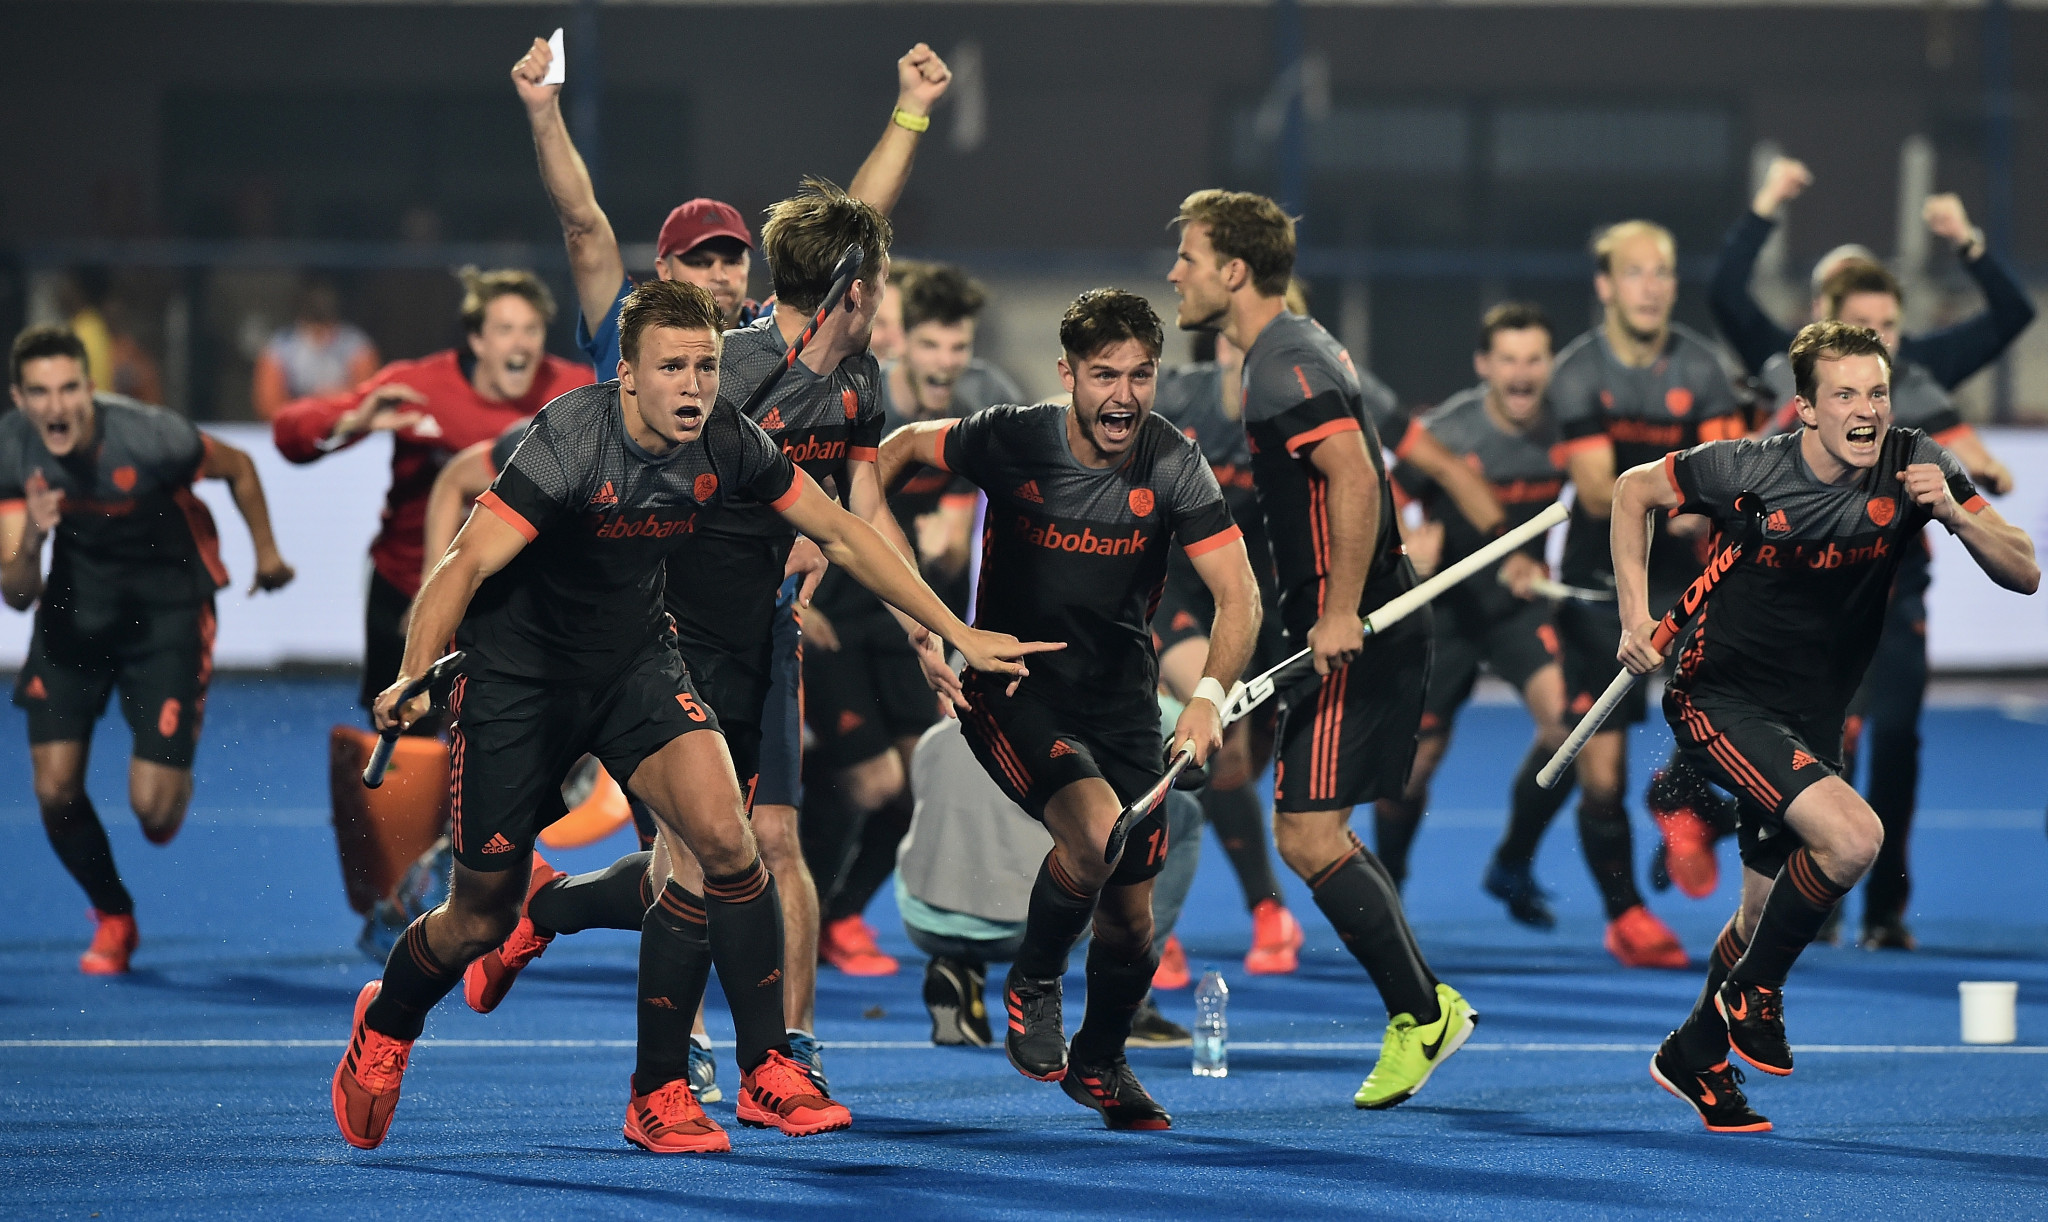 The Netherlands beat Australia in a shoot-out after a thrilling match ended 2-2 ©Getty Images